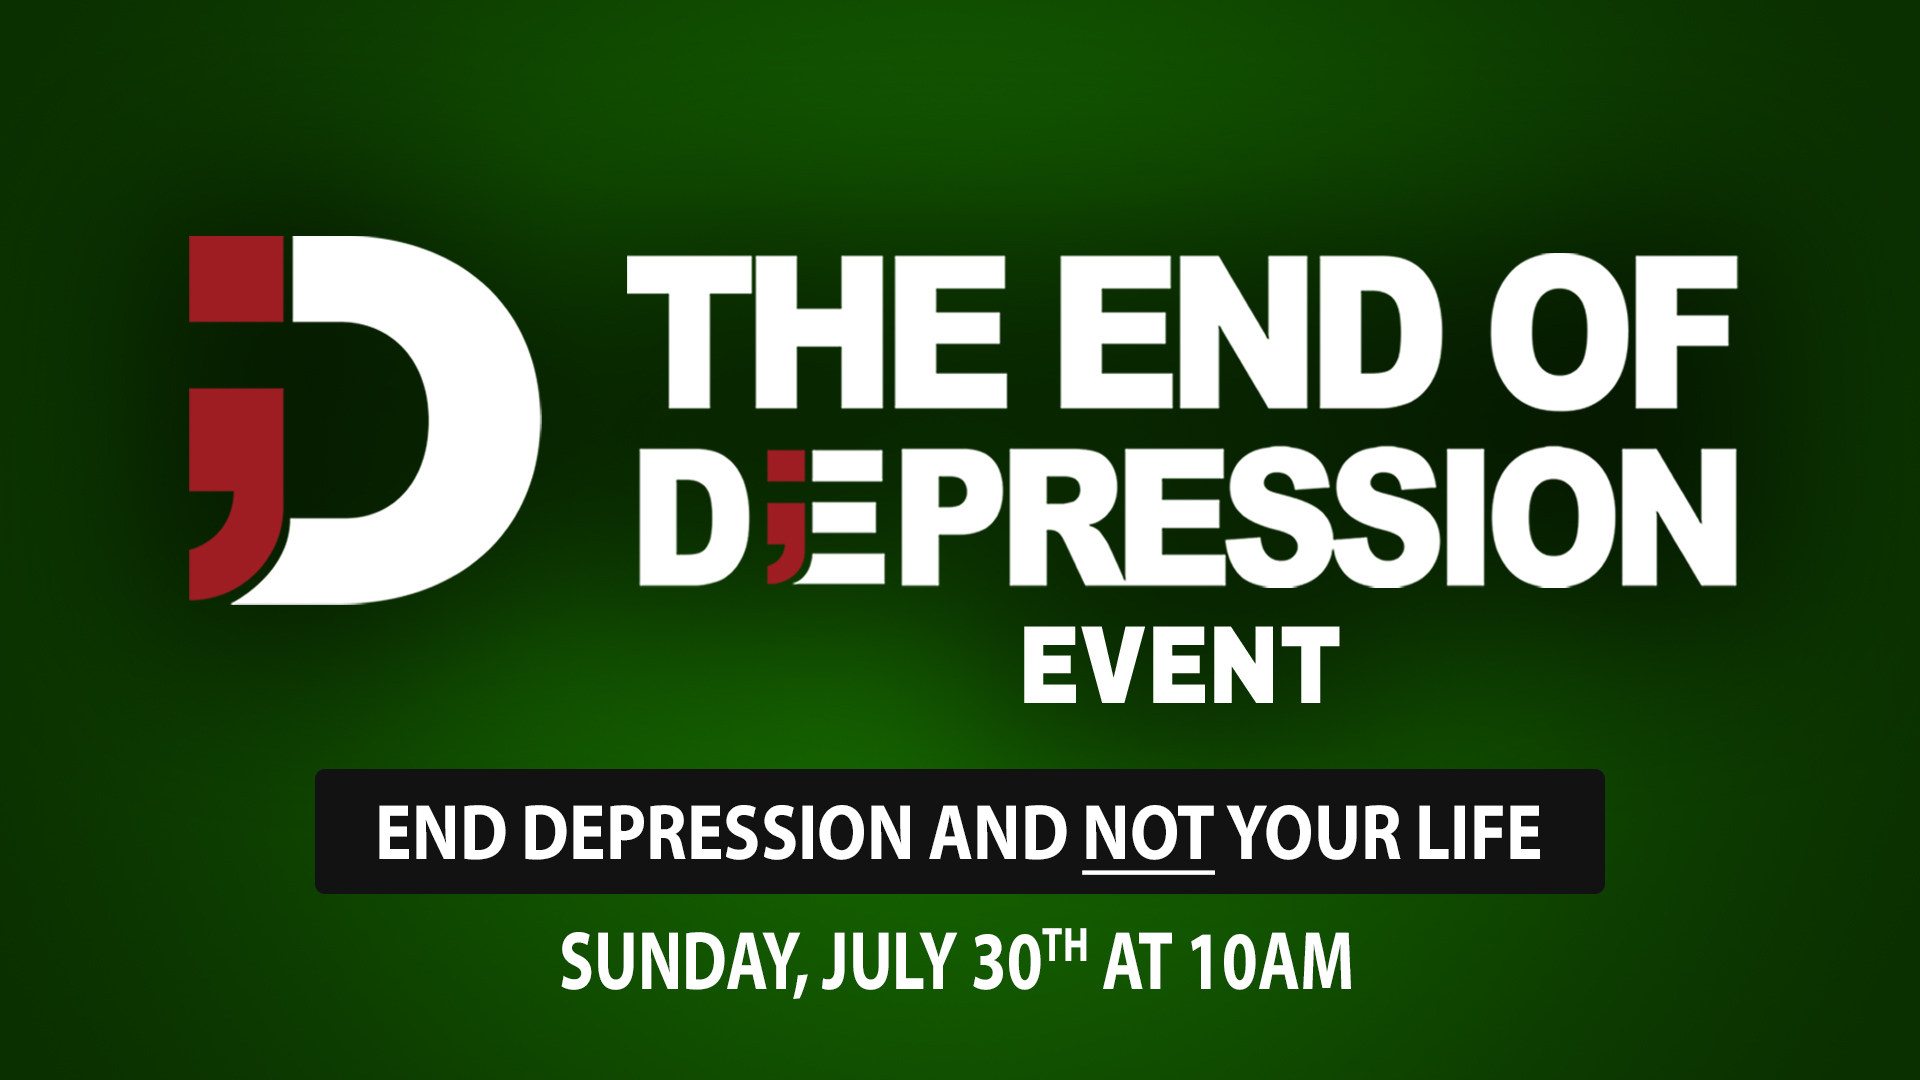 The End of Depression Event